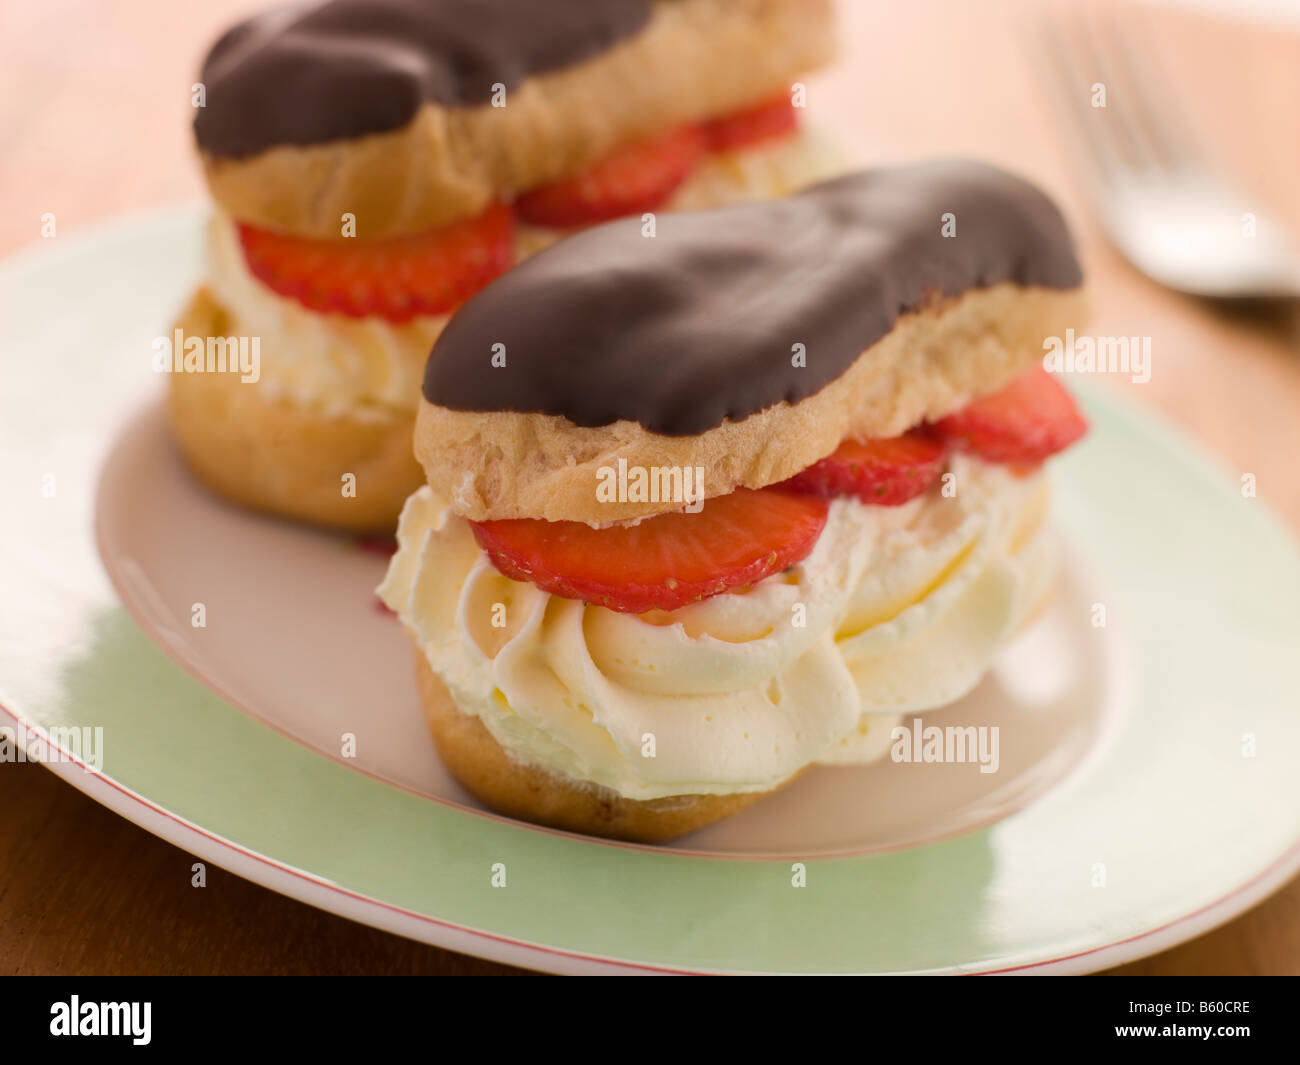 Chocolate and Strawberry filled eclairs Stock Photo